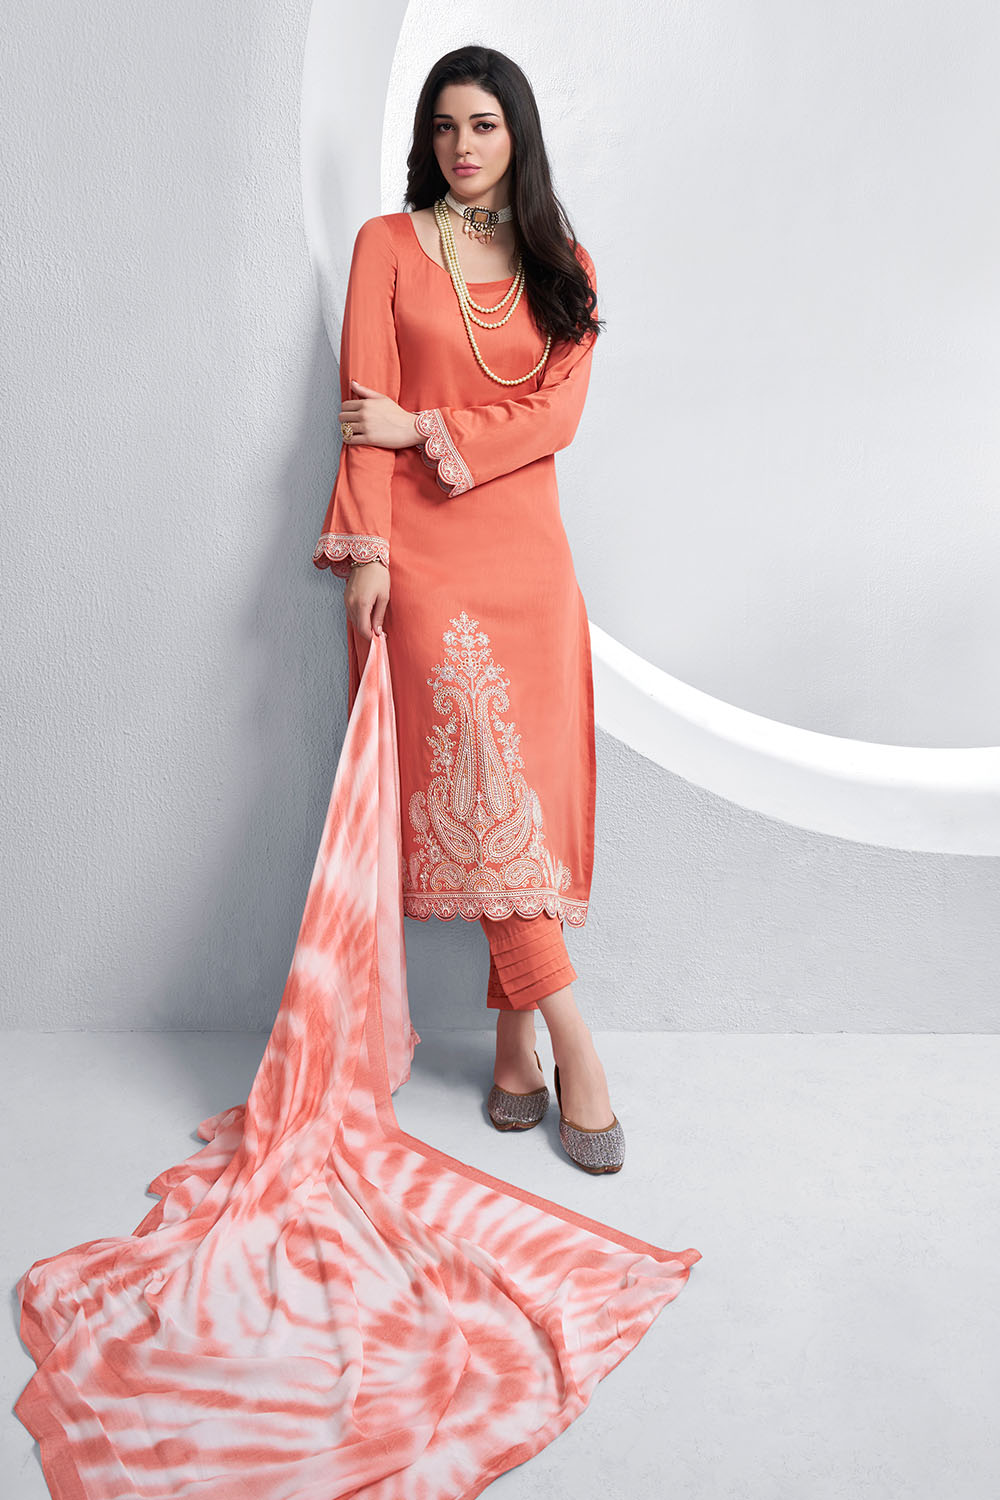 Peach Color Cotton Hemline Embroidered Unstitched Suit Material